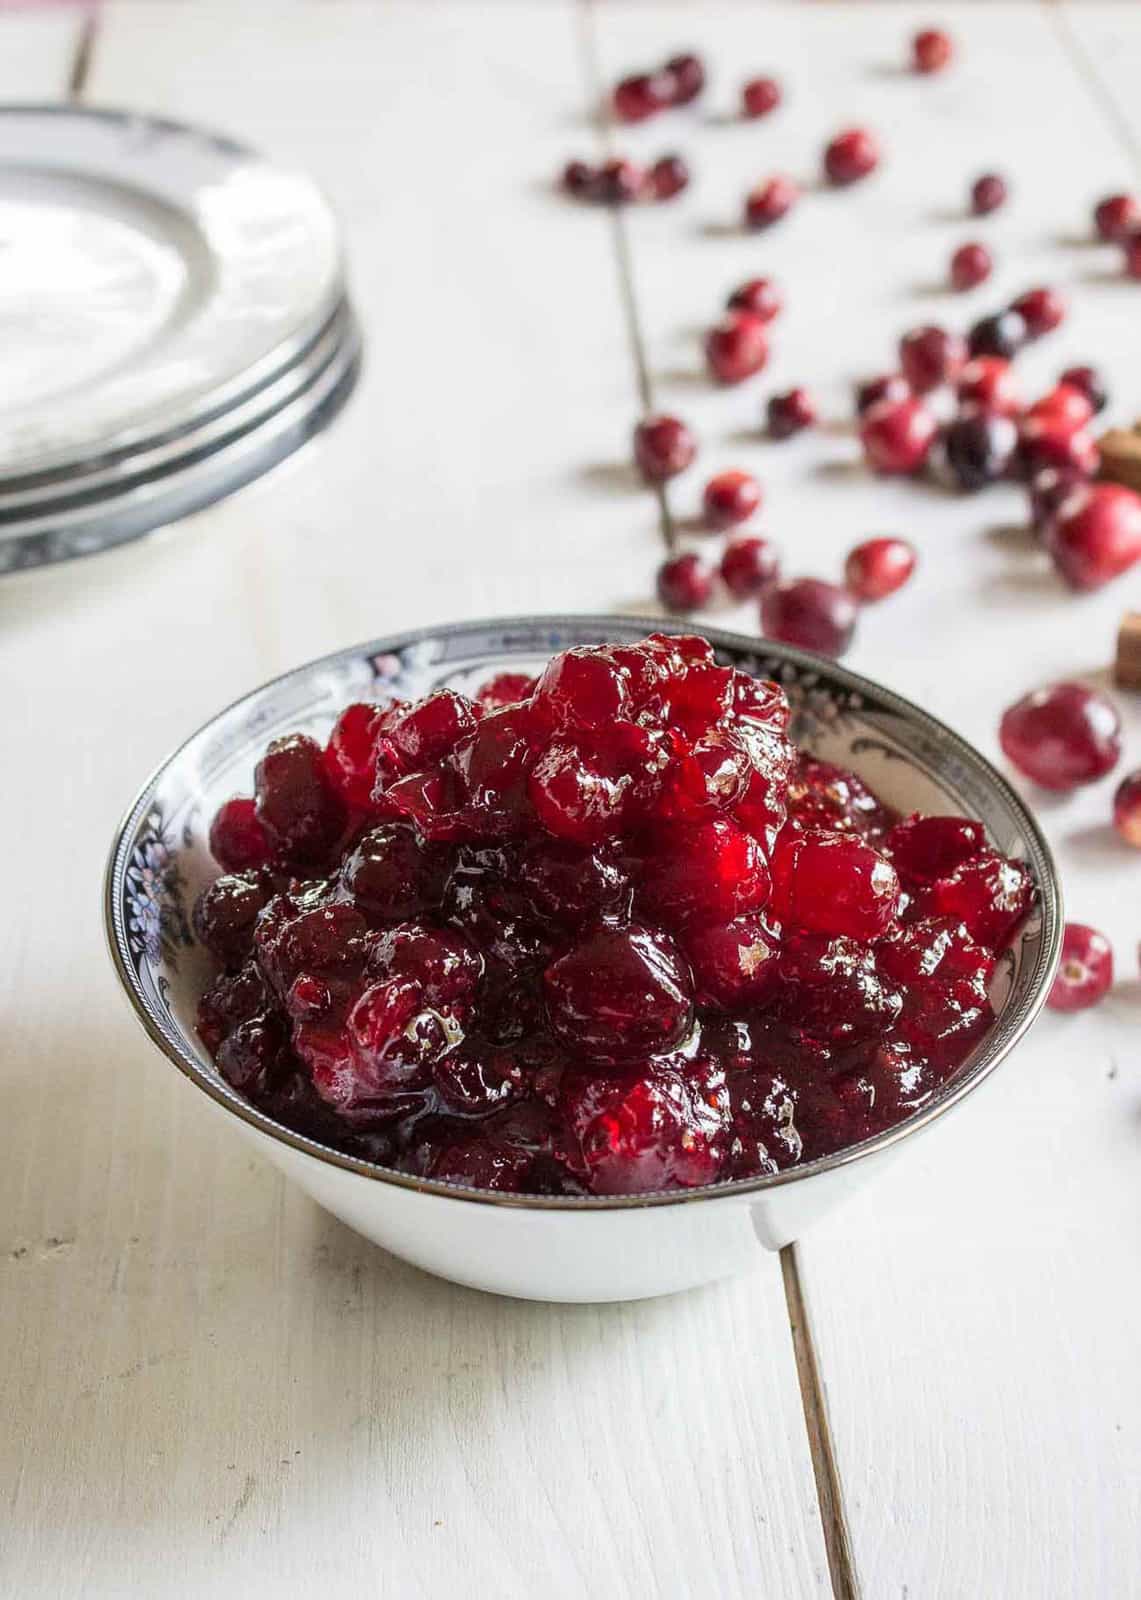 A small dish filled with cranberry sauce and fresh cranberries behind the dish.